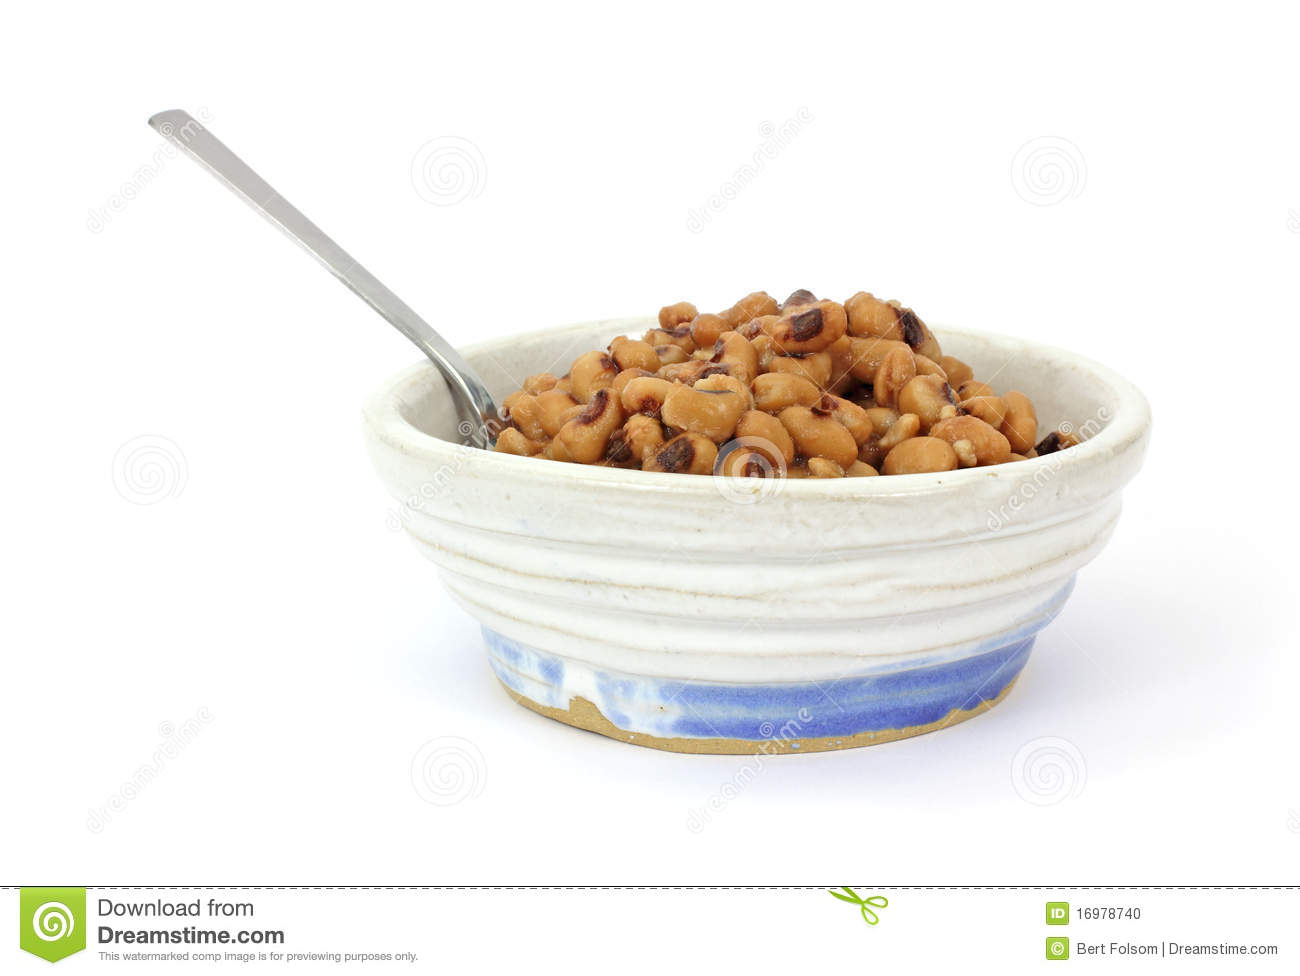 Large Serving Of Black Eyed Peas In An Old Bowl With Spoon On A White